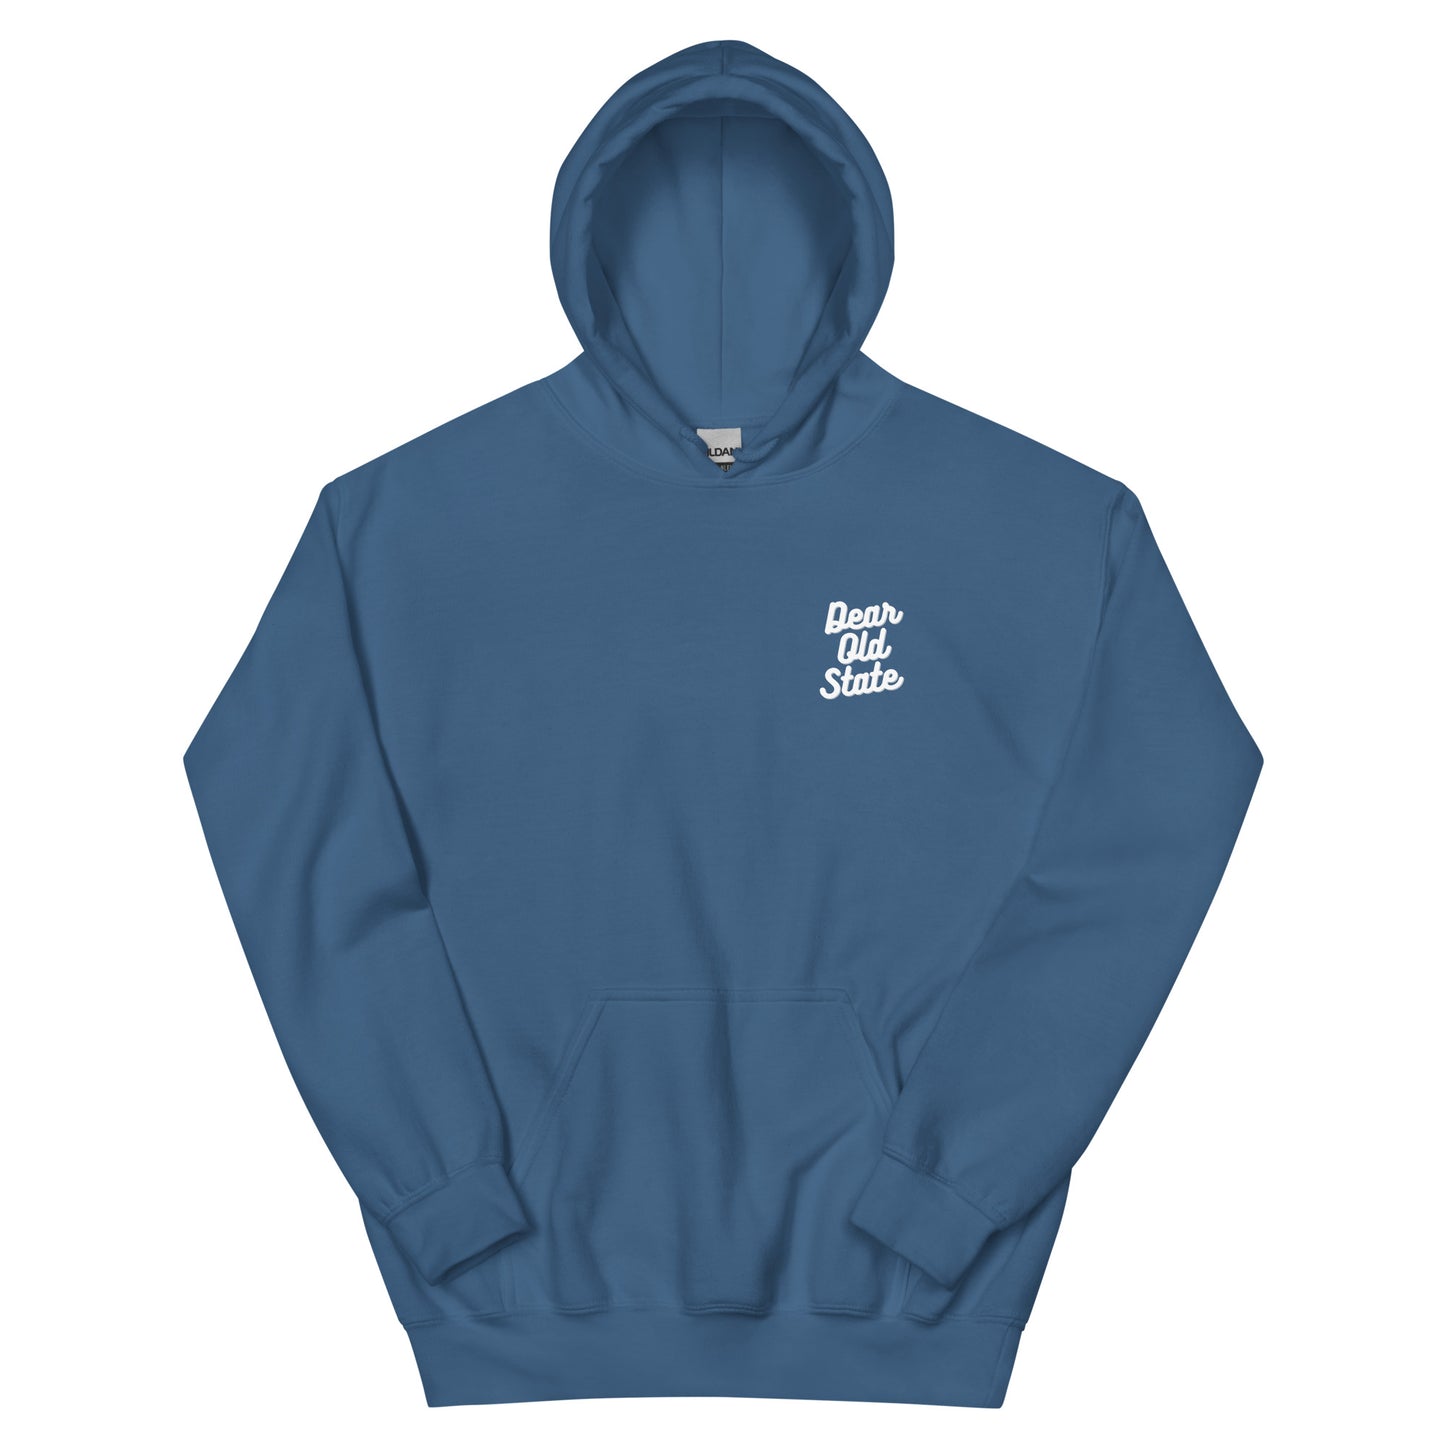 "It's always sunny at the happy valley" Hoodie